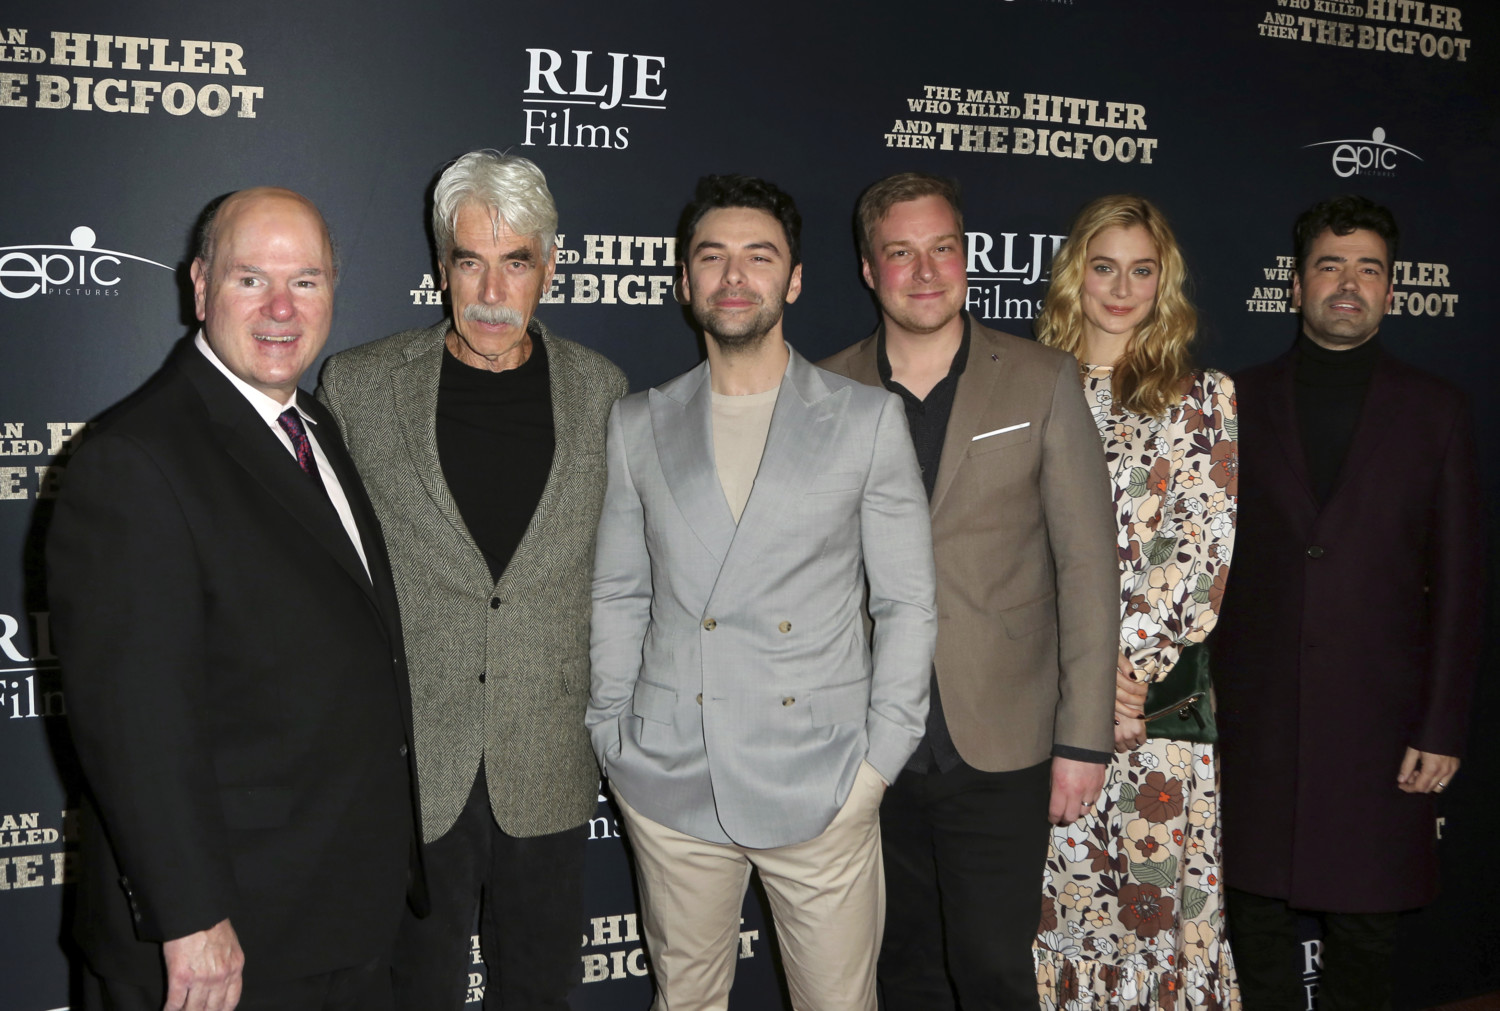 Larry Miller, from left, Sam Elliott, Aidan Turner, Robert D. Krzykowski, Caitlin FitzGerald and Ron Livingston arrive at the LA Premiere of "The Man Who Killed Hitler and Then The Bigfoot" at the ArcLight Hollywood on Monday, Feb. 4, 2019, in Los Angeles. (Photo by Willy Sanjuan/Invision/AP)